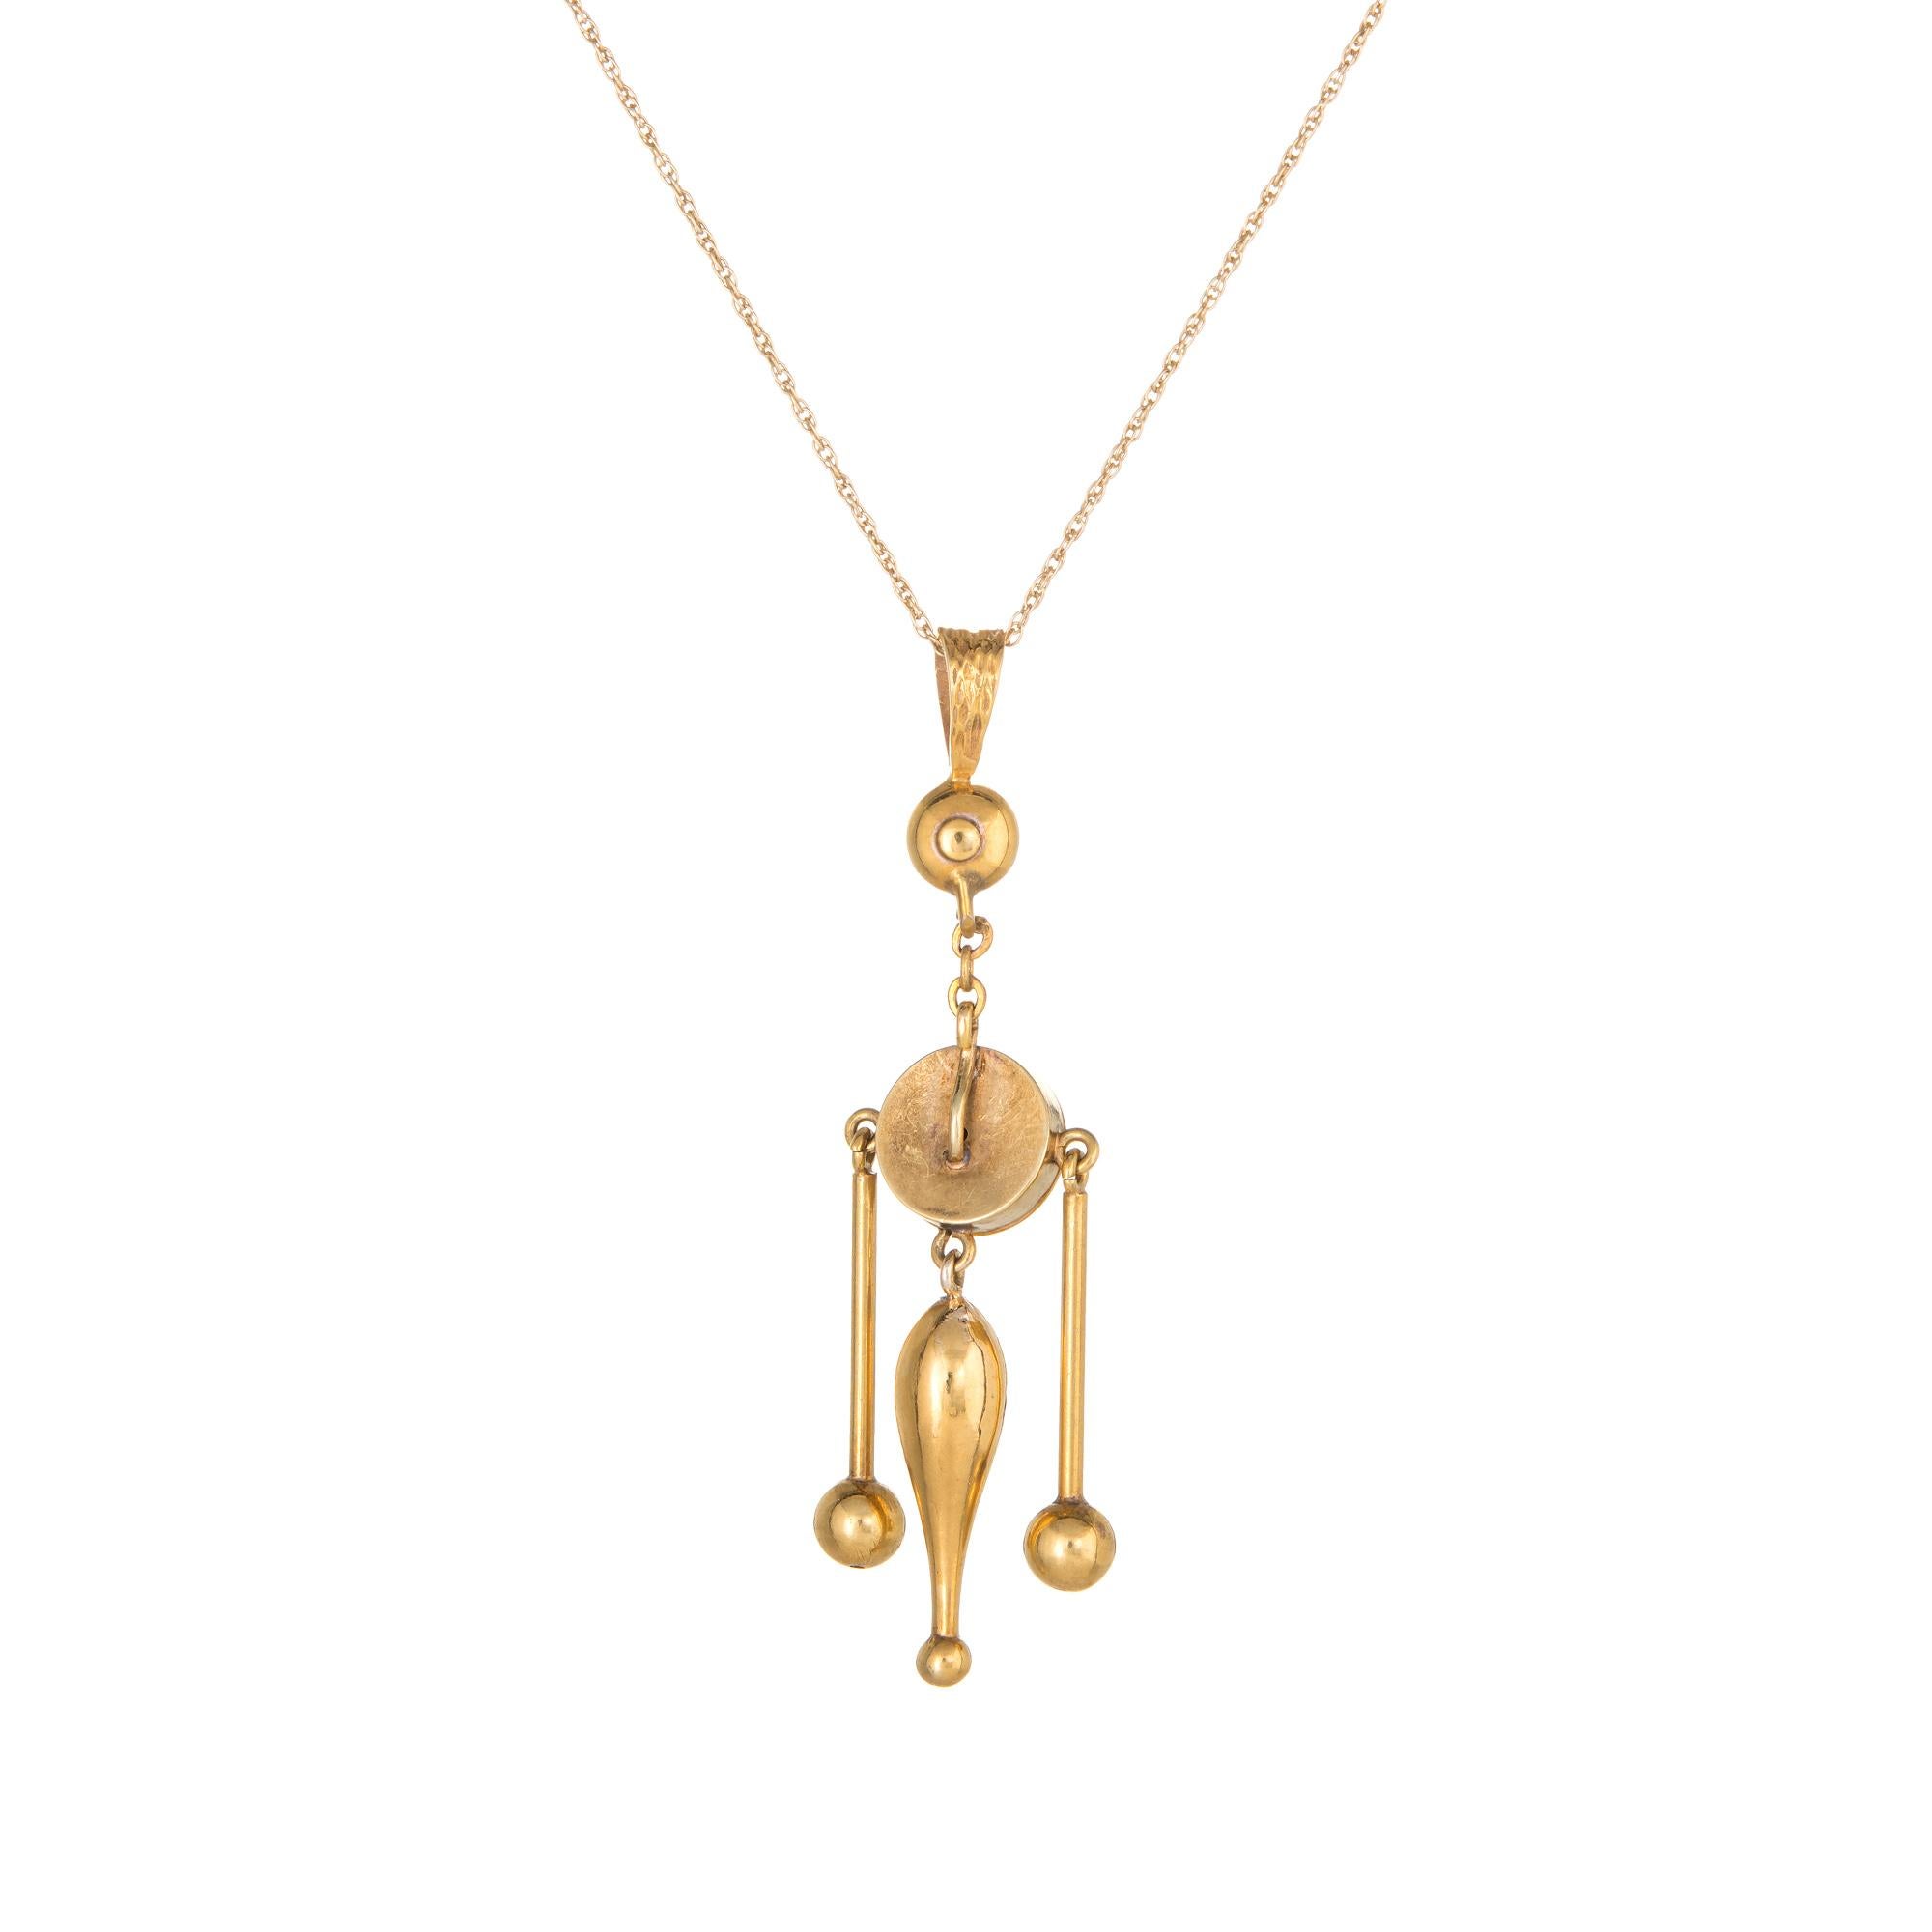 Stylish and finely detailed vintage Etruscan style drop pendant & necklace crafted in 14 karat yellow gold.  

The pendant features Etruscan style detailing to the round center with an attached three tier drops. The necklace is great worn alone or